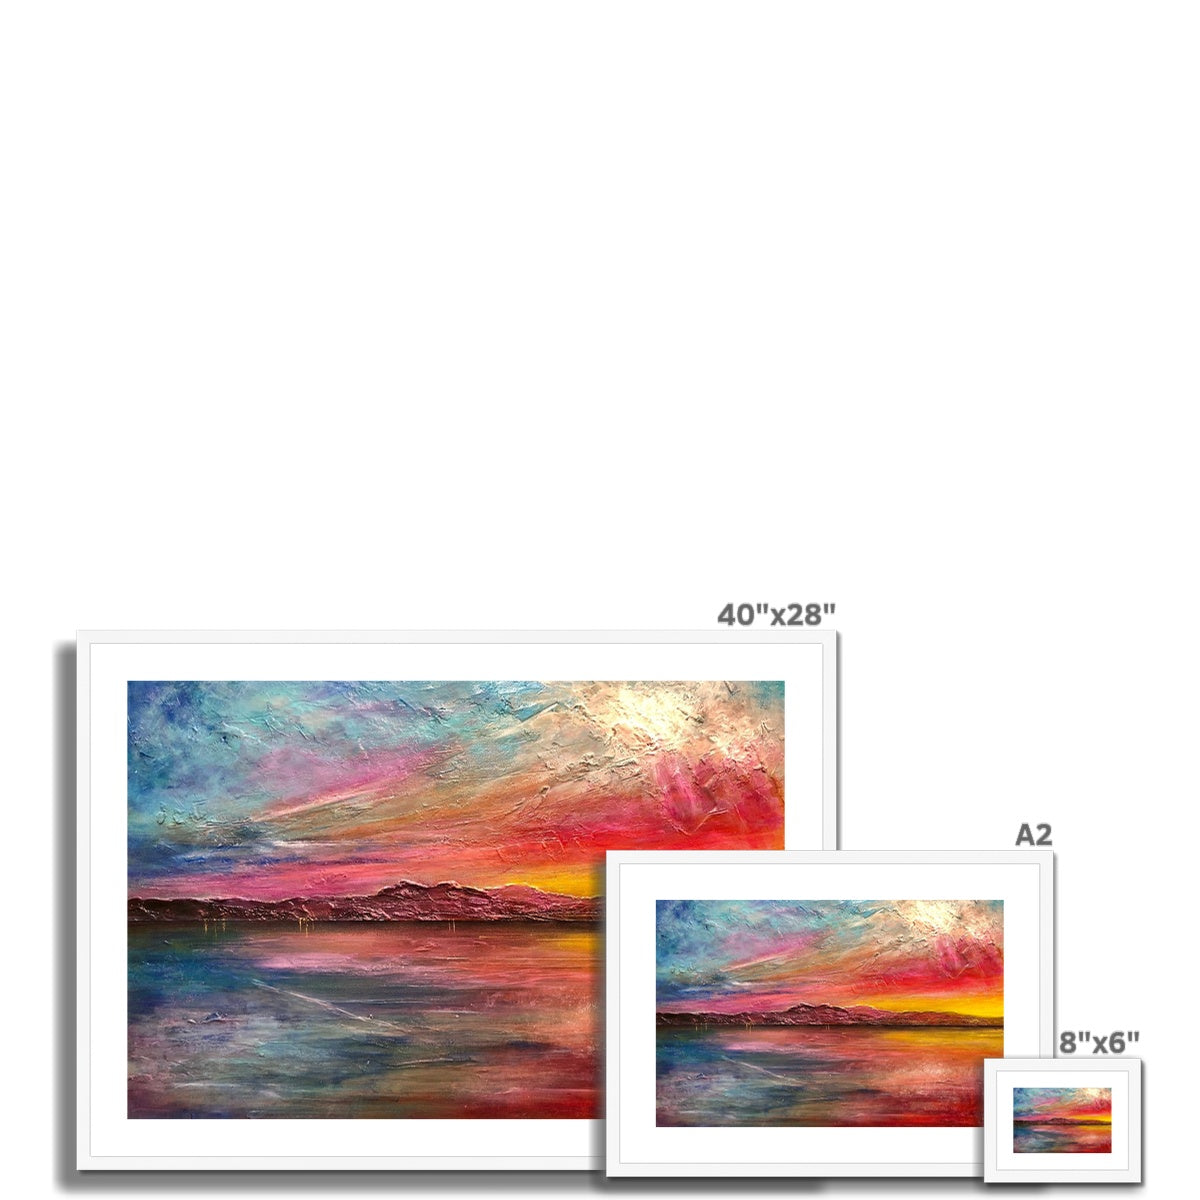 Arran Sunset ii Painting | Framed & Mounted Prints From Scotland-Framed & Mounted Prints-Arran Art Gallery-Paintings, Prints, Homeware, Art Gifts From Scotland By Scottish Artist Kevin Hunter